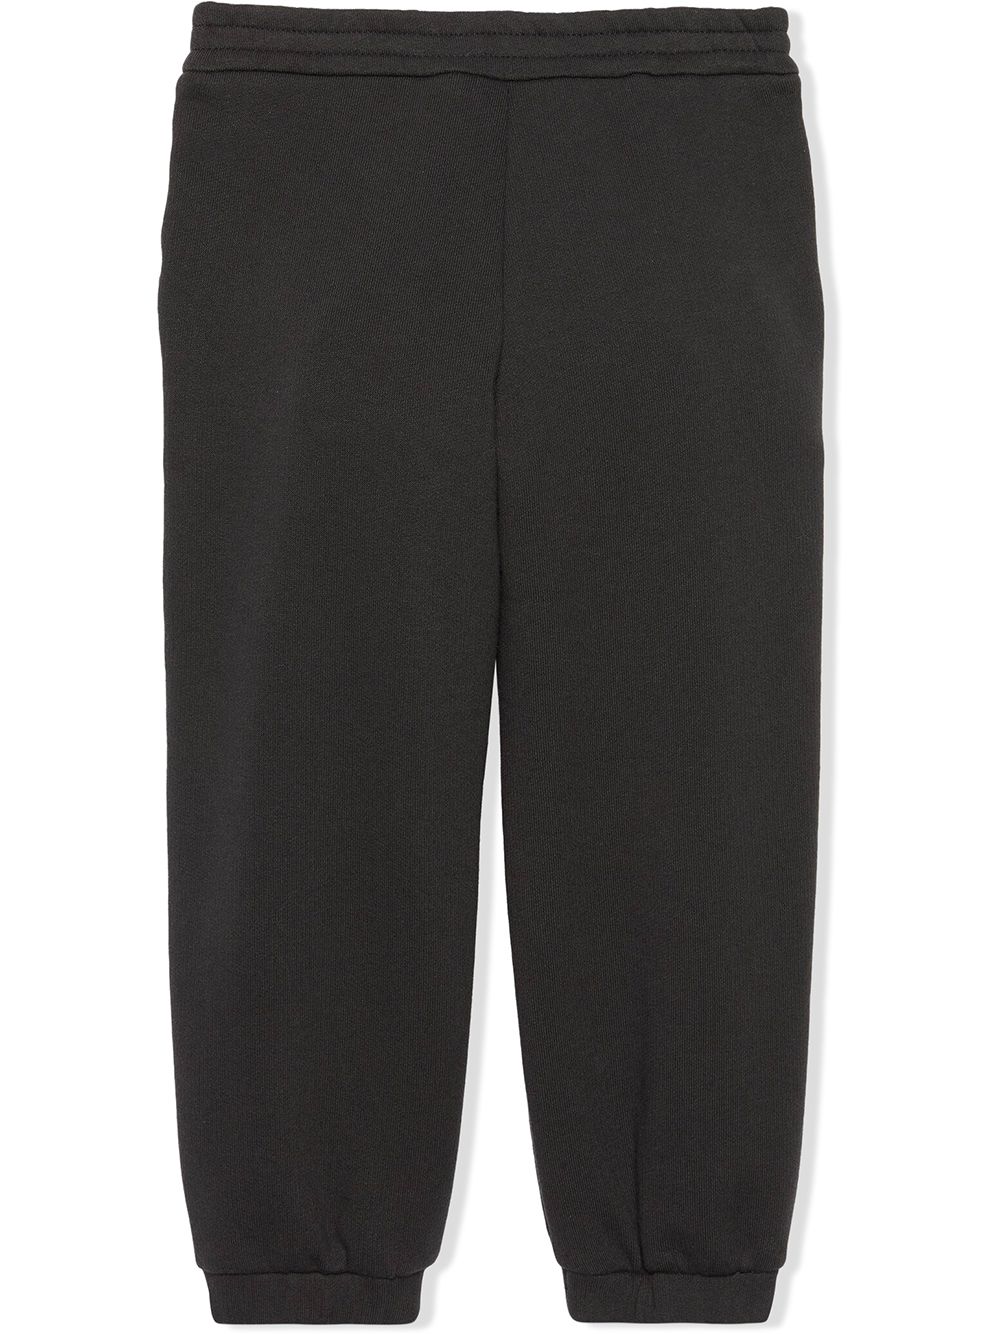 Shop Gucci Trousers With Elastic At The Ankles In Grigio